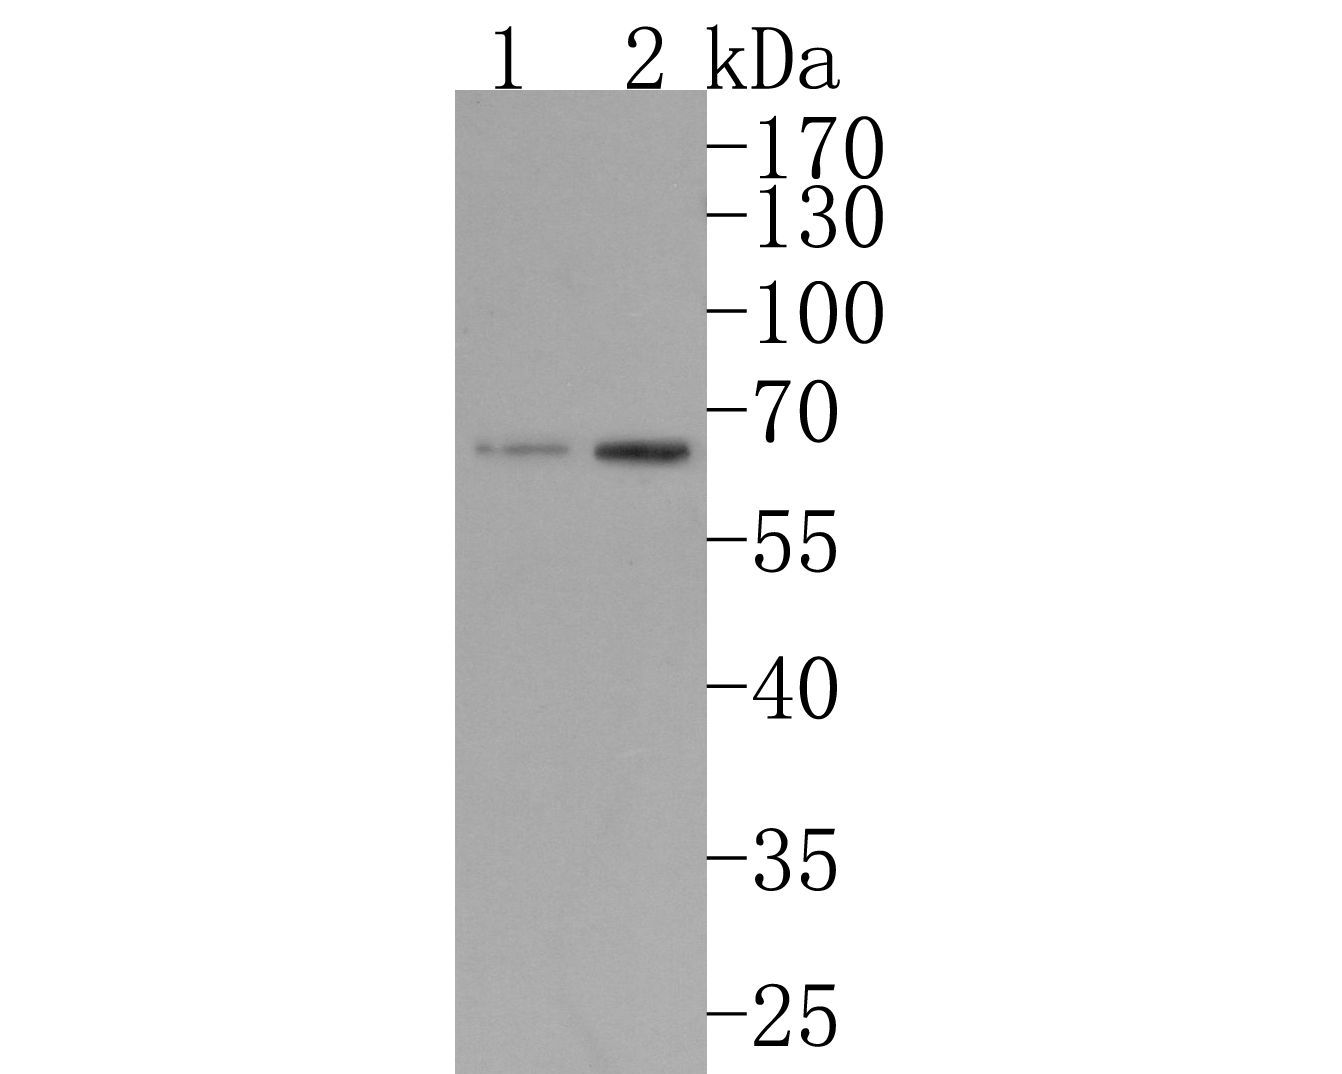 Western blot analysis of IKZF3 on different lysates. Proteins were transferred to a PVDF membrane and blocked with 5% BSA in PBS for 1 hour at room temperature. The primary antibody (HA720110, 1/500) was used in 5% BSA at room temperature for 2 hours. Goat Anti-Rabbit IgG - HRP Secondary Antibody (HA1001) at 1:200,000 dilution was used for 1 hour at room temperature.<br />
Positive control: <br />
Lane 1: K562 cell lysate<br />
Lane 2: Daudi cell lysate